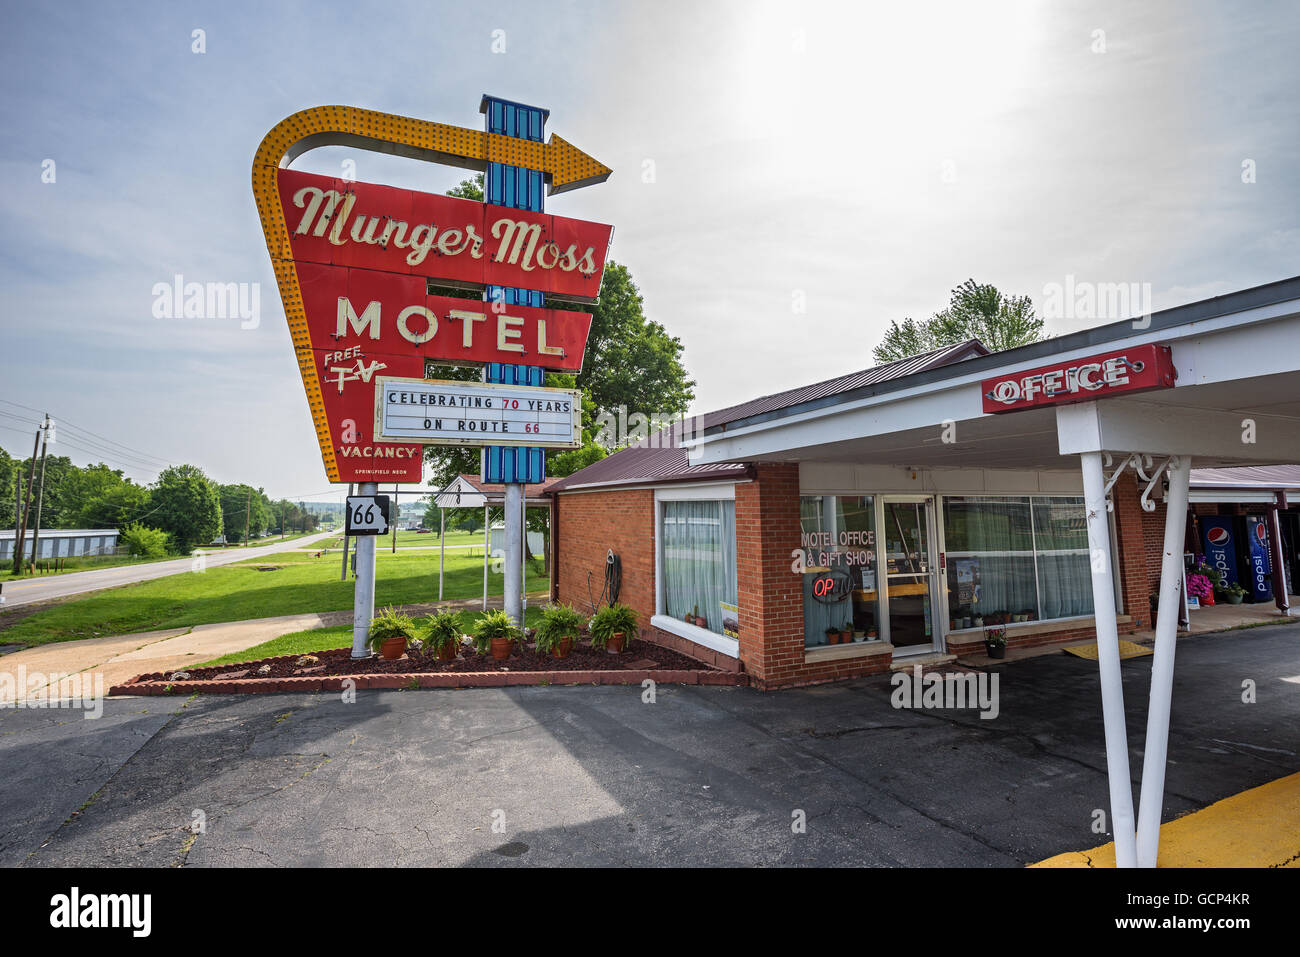 Munger Moss Motel and vintage neon sign on historic Route 66 in Missouri. Stock Photo